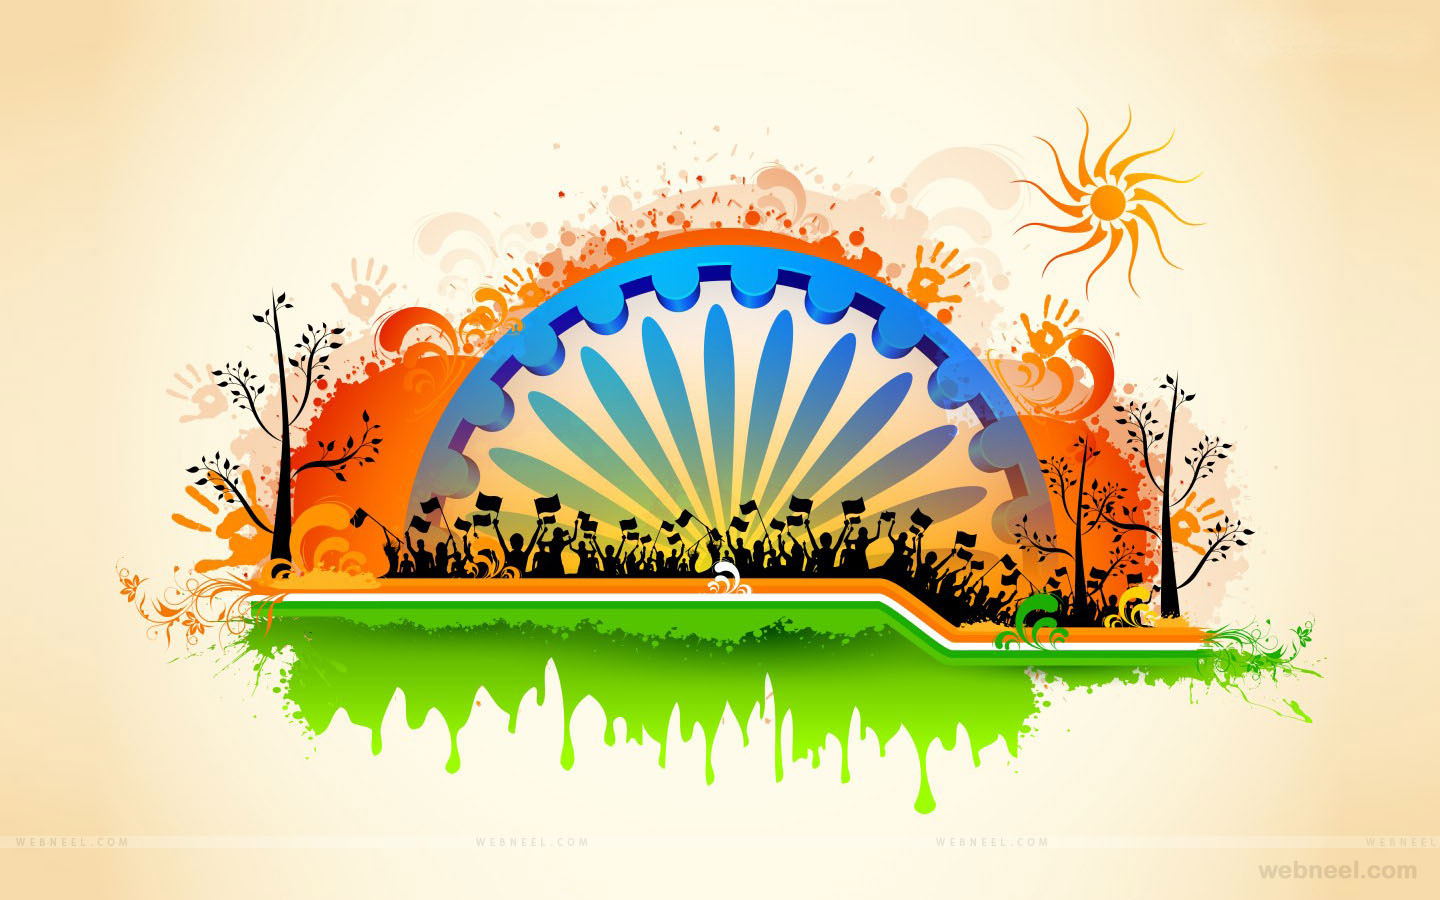 Happy Republic Day - India Republic Day Background , HD Wallpaper & Backgrounds